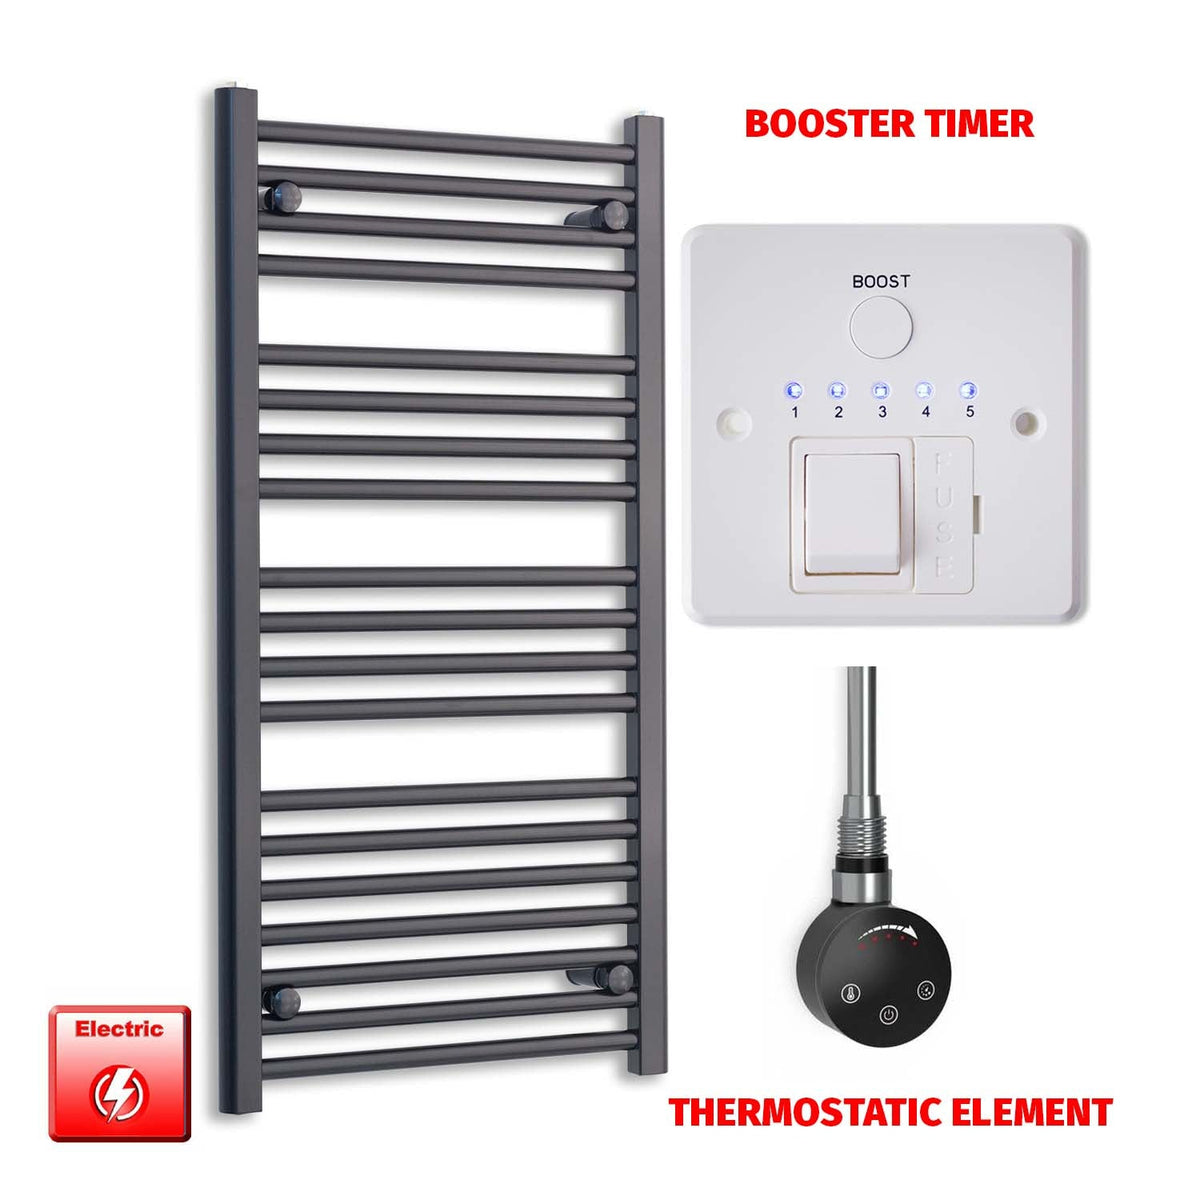 1000mm High 500mm Wide Flat Black Pre-Filled Electric Heated Towel Rail Radiator HTR Smart Thermostatic Booster Timer